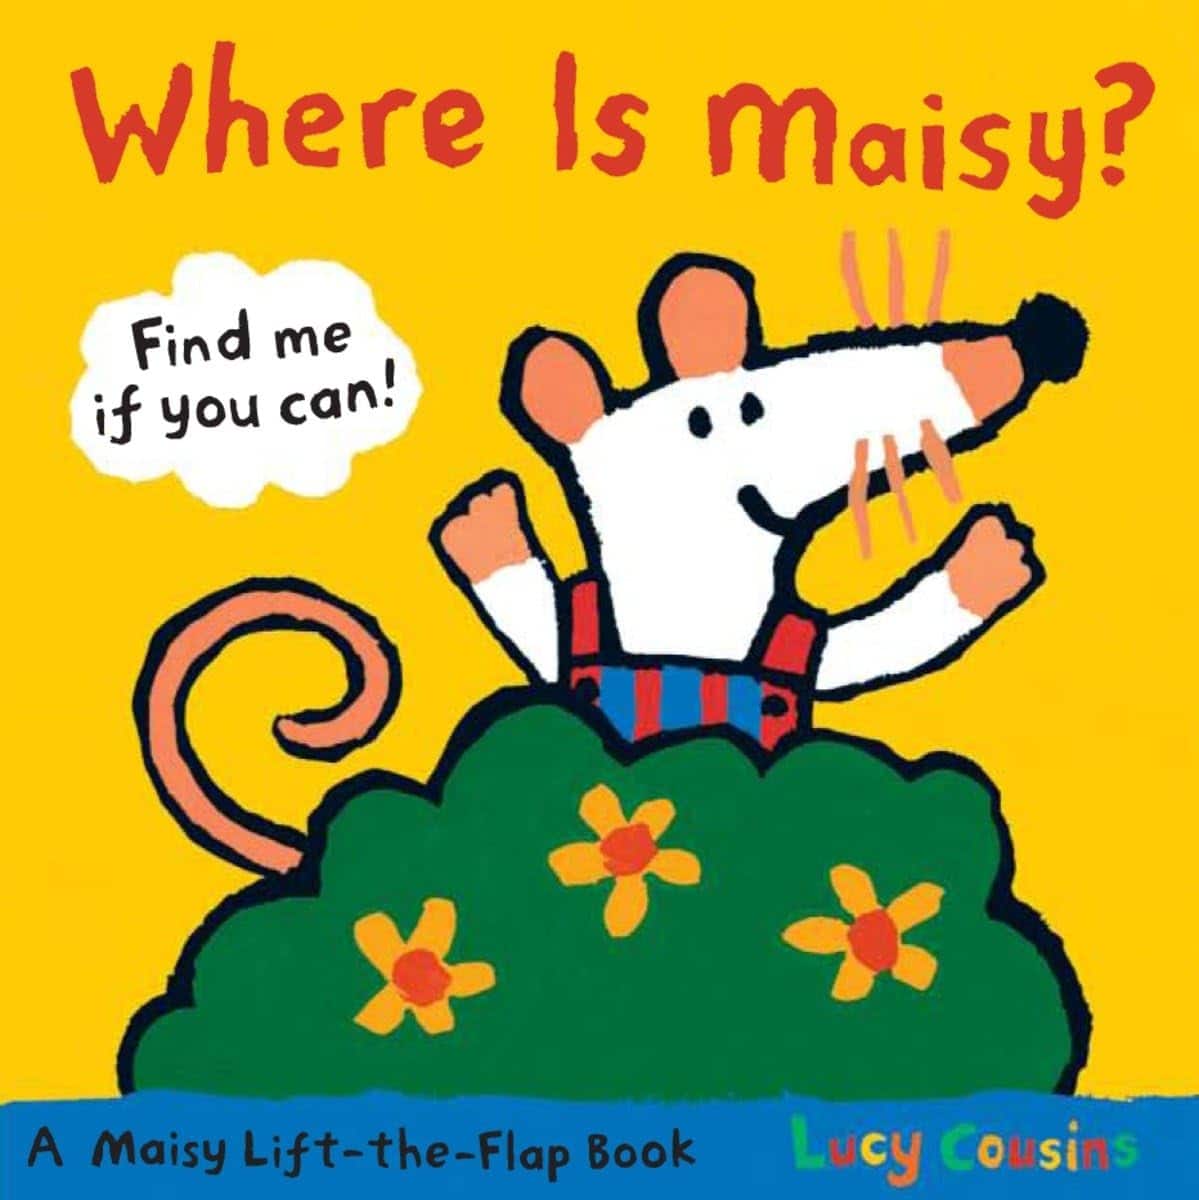 Where Is Maisy?: A Maisy Lift-the-Flap Book Board book